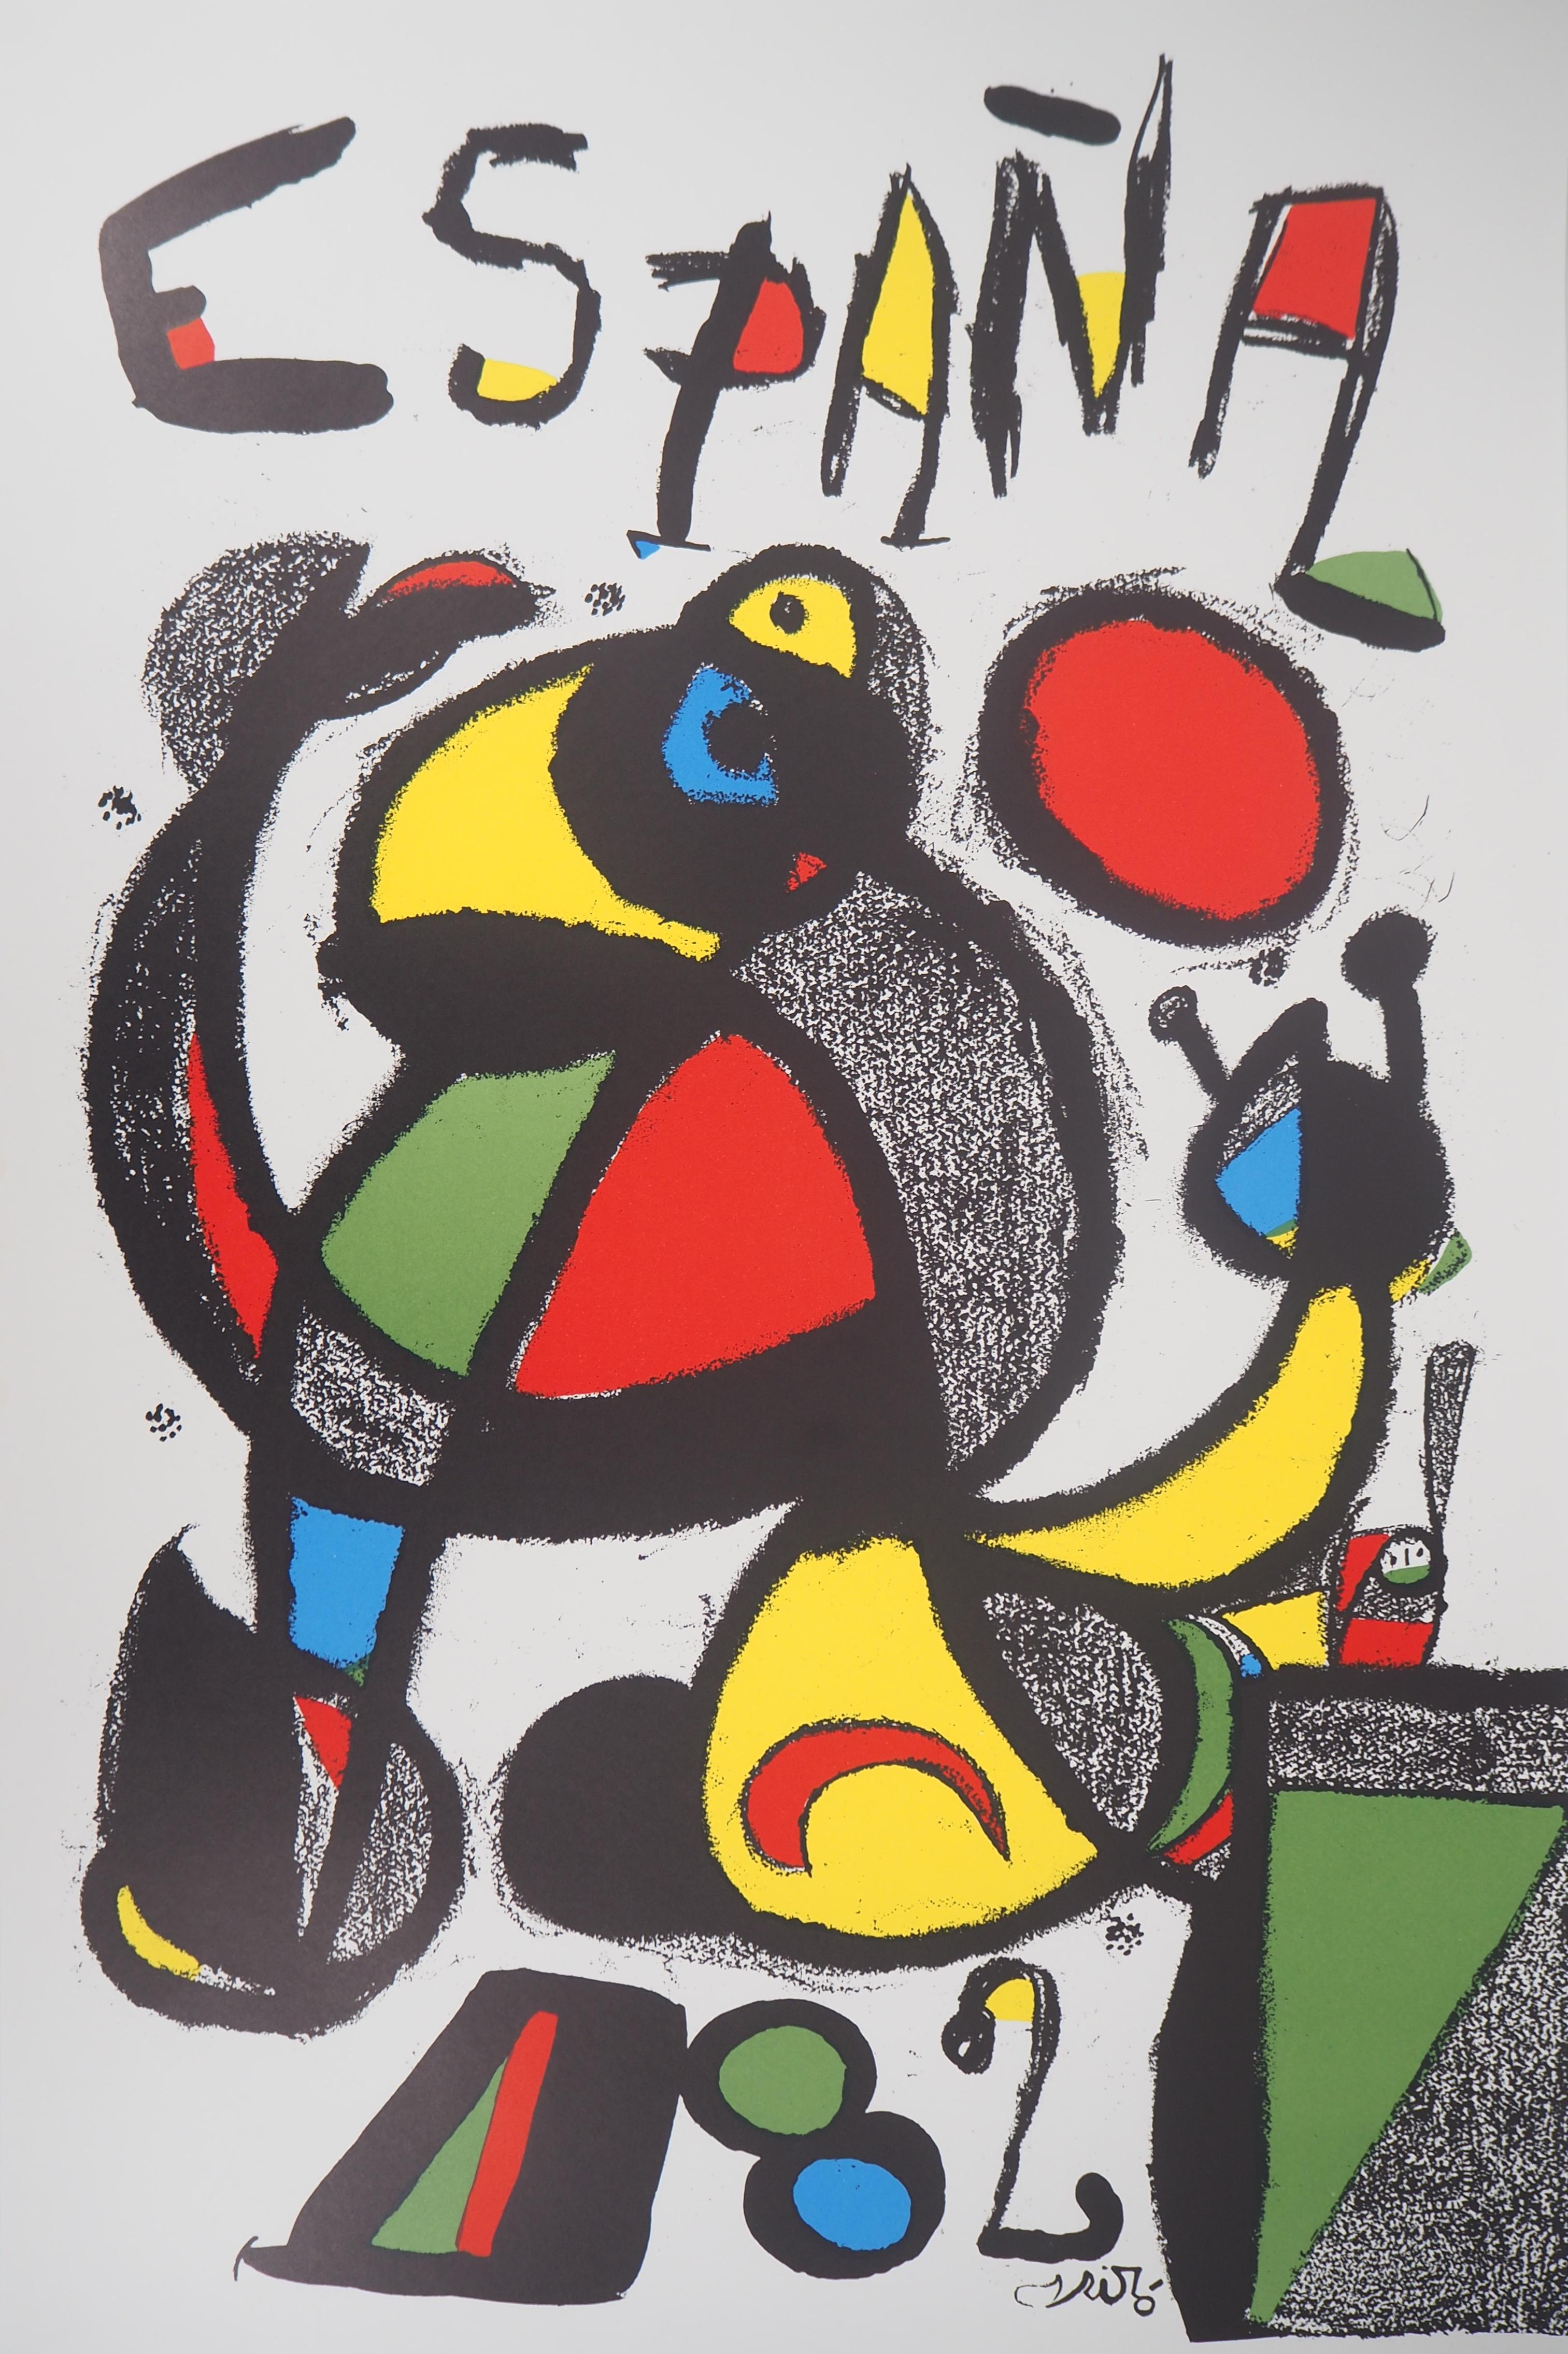 Joan MIRO
Espana, Surrealist figure, 1982

Original lithograph in colors (atelier Arte, Maeght) 
Printed signature in the plate
On thin paper 95 x 60 cm (c. 37.4 x 23.6 in)

References : Miro lithograph, Mourlot, référence #1250

Excellent condition